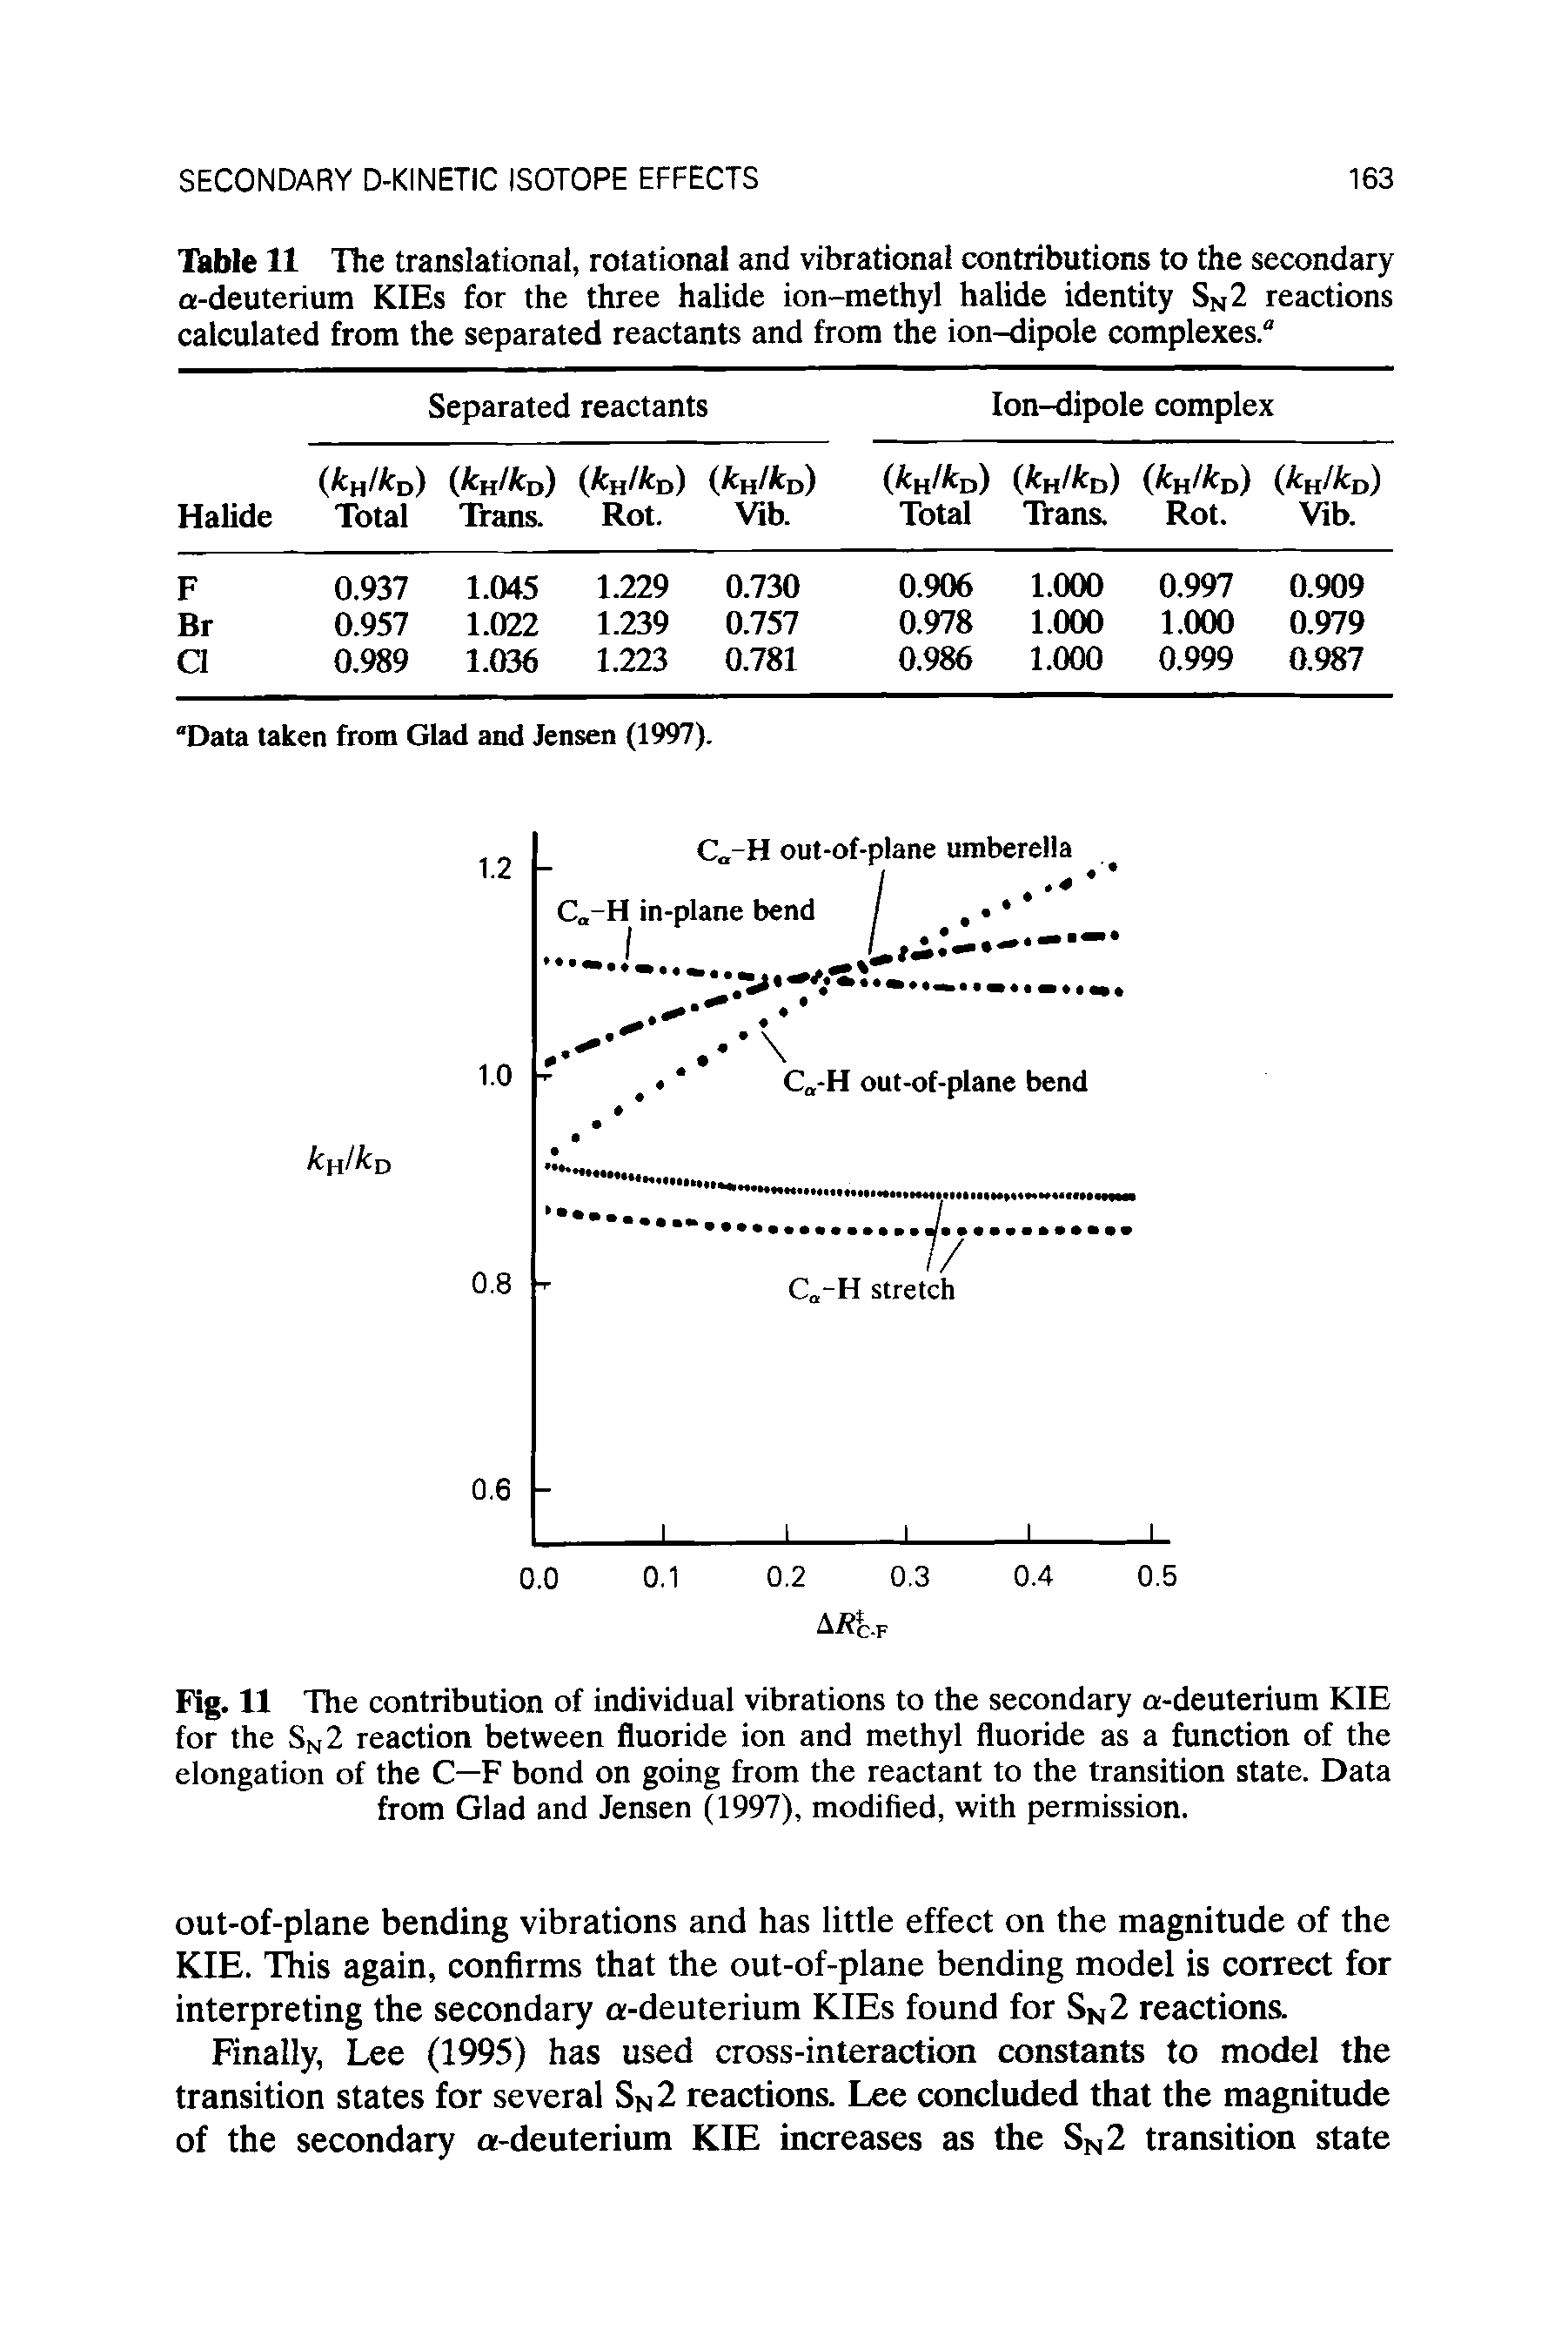 Table 11 The translational, rotational and vibrational contributions to the secondary a-deuterium KIEs for the three halide ion-methyl halide identity SN2 reactions calculated from the separated reactants and from the ion-dipole complexes."...